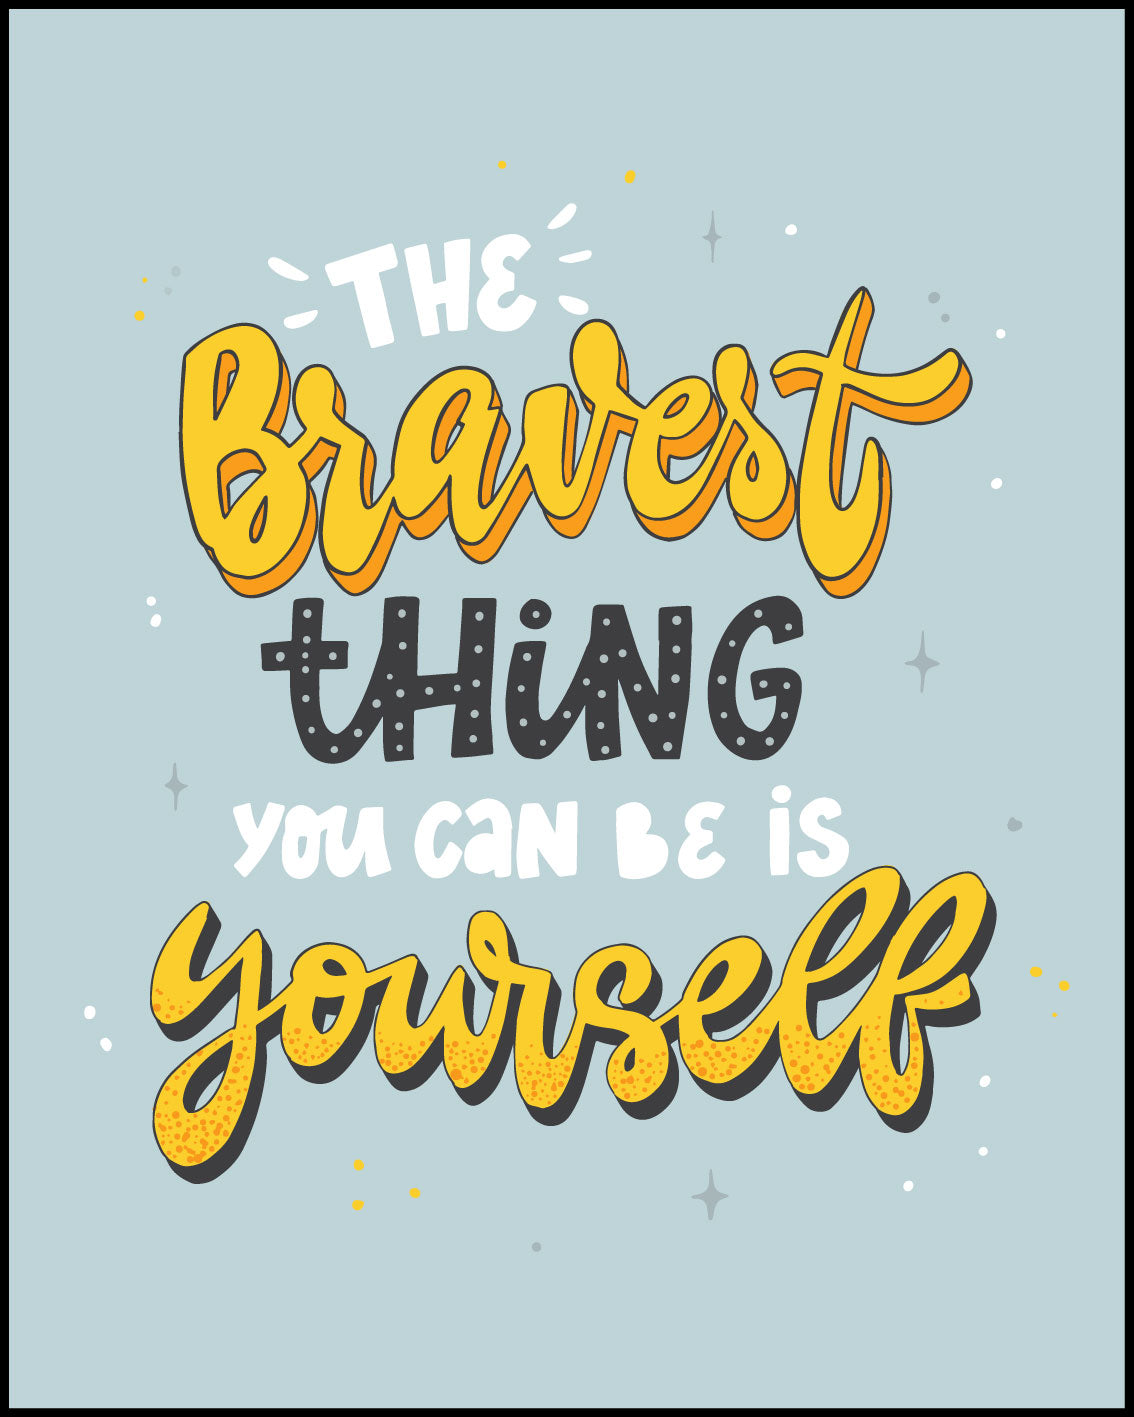 The bravest thing you can be is yourself Poster